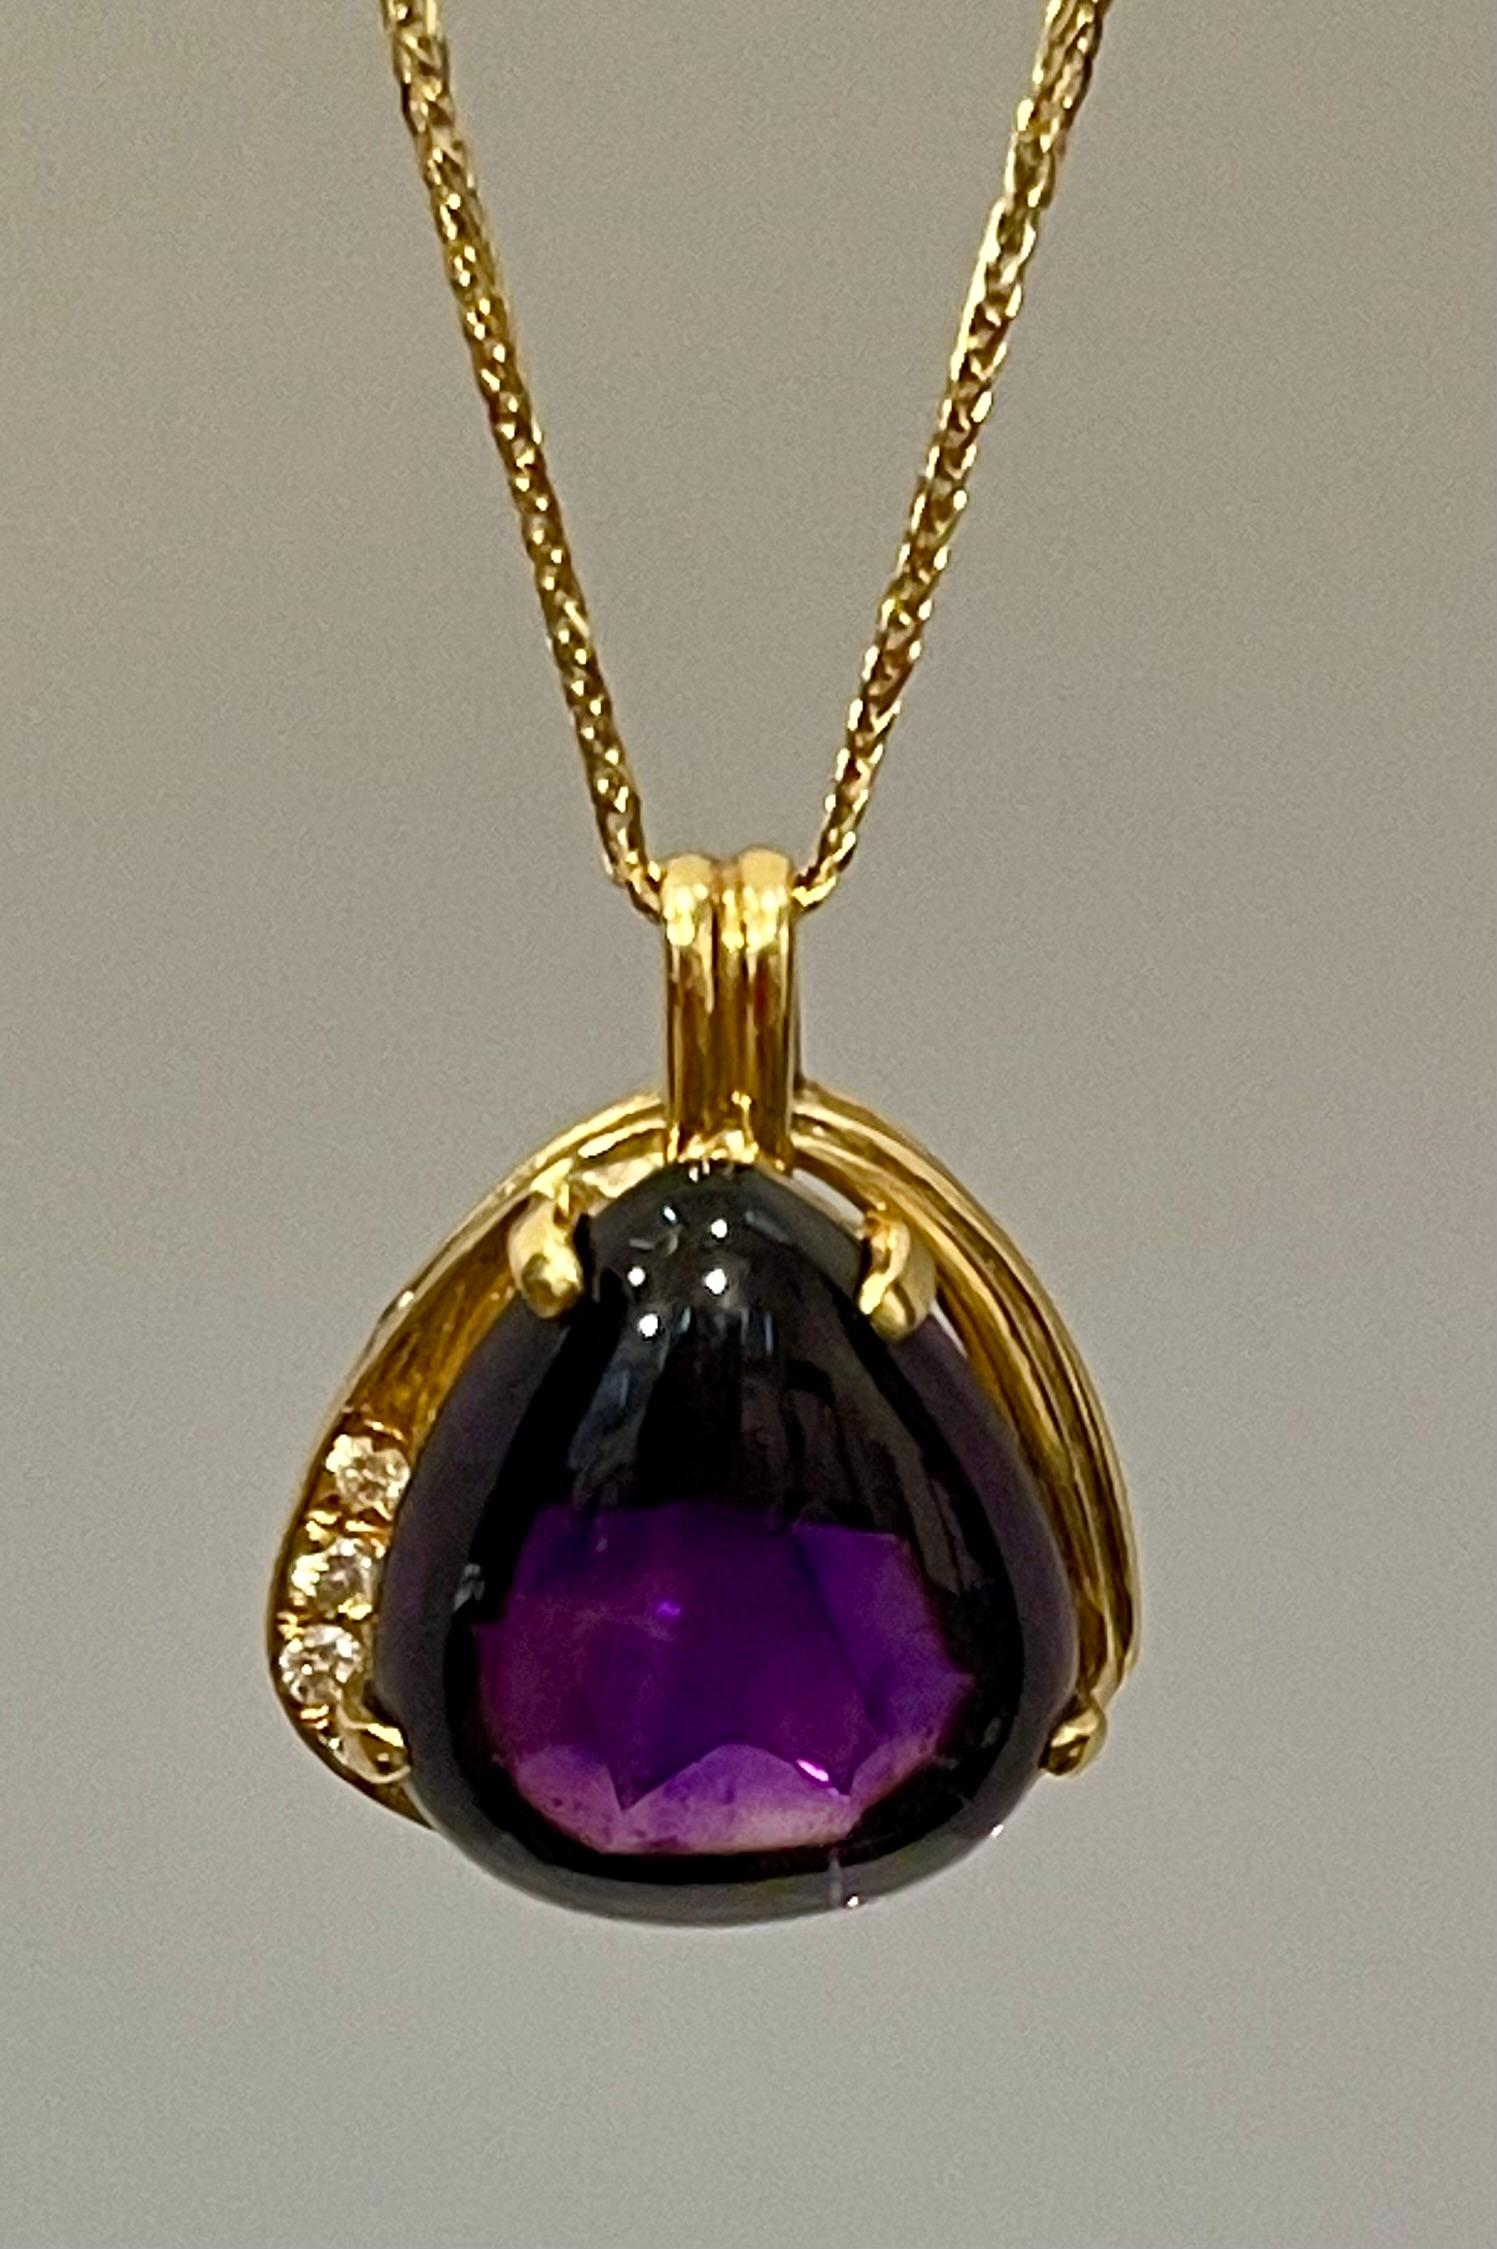 10 Carat Tear Drop Amethyst and Diamonds Pendent Necklace 18 Karat Yellow Gold For Sale 1